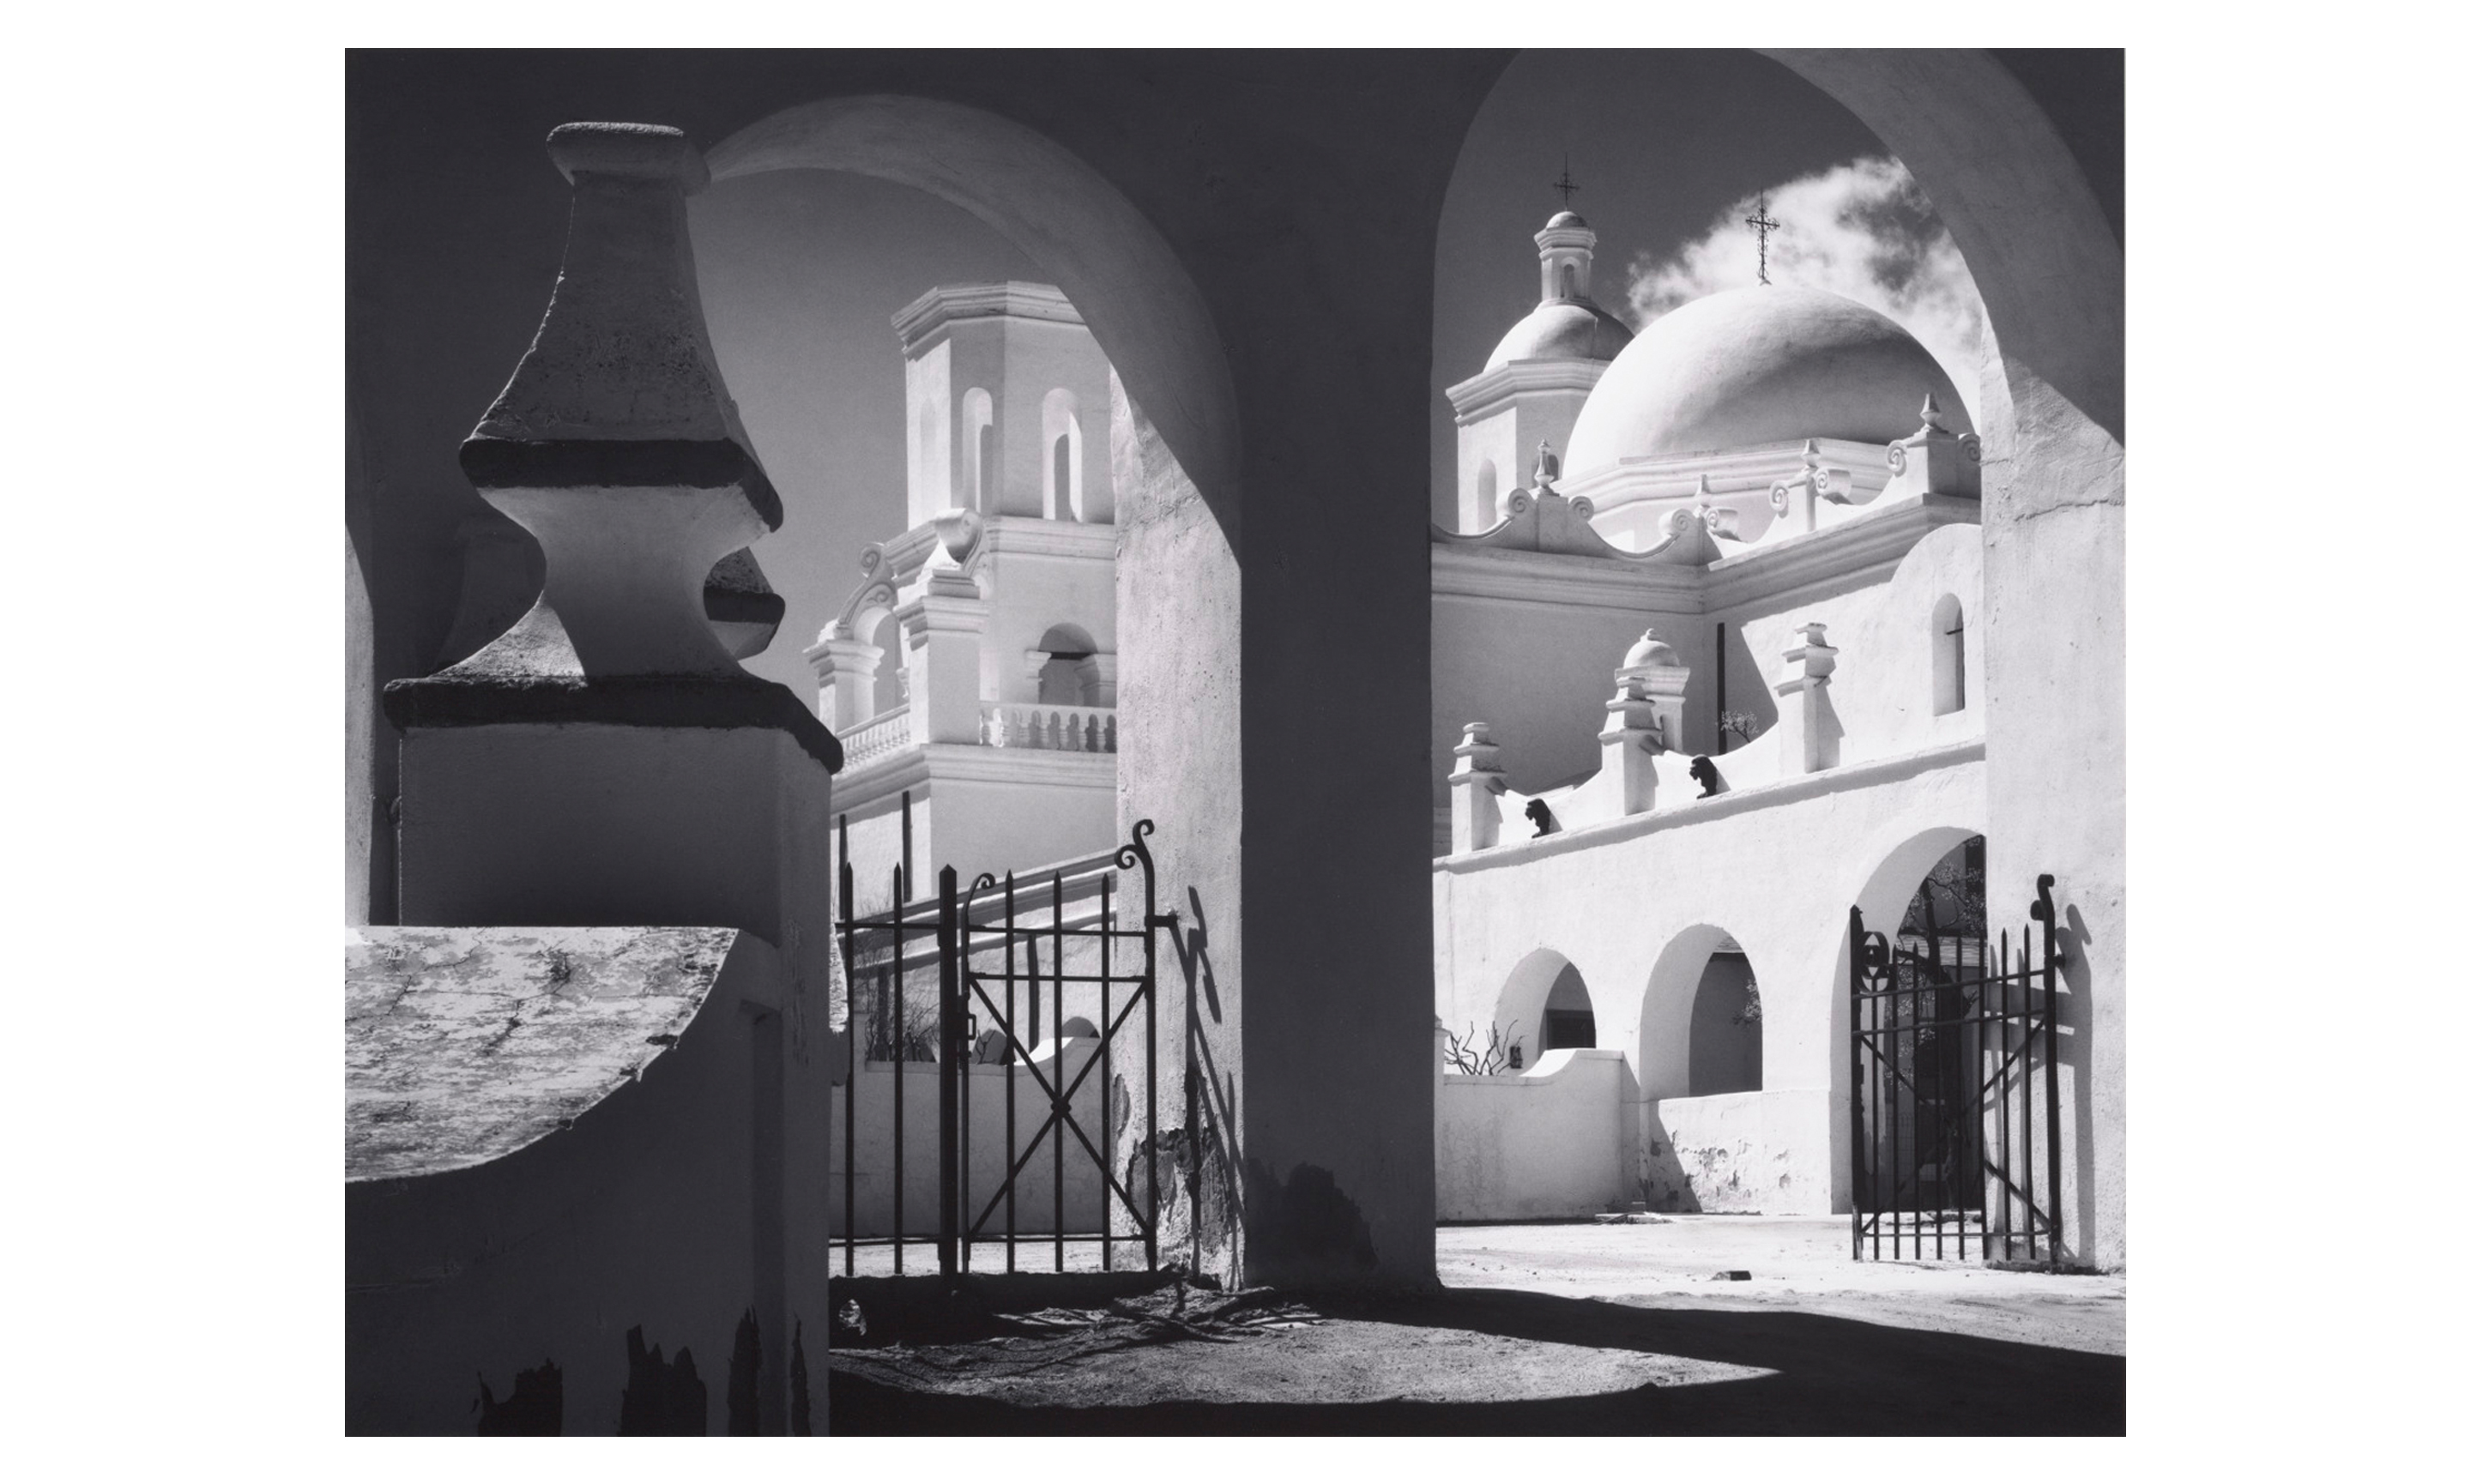 Ansel Adams, Arches, North Court, Mission San Xavier del Bac, Tucson, Arizona, 1968. Gelatin silver print. Center for Creative Photography, University of Arizona, Ansel Adams Archive. © The Ansel Adams Publishing Rights Trust.